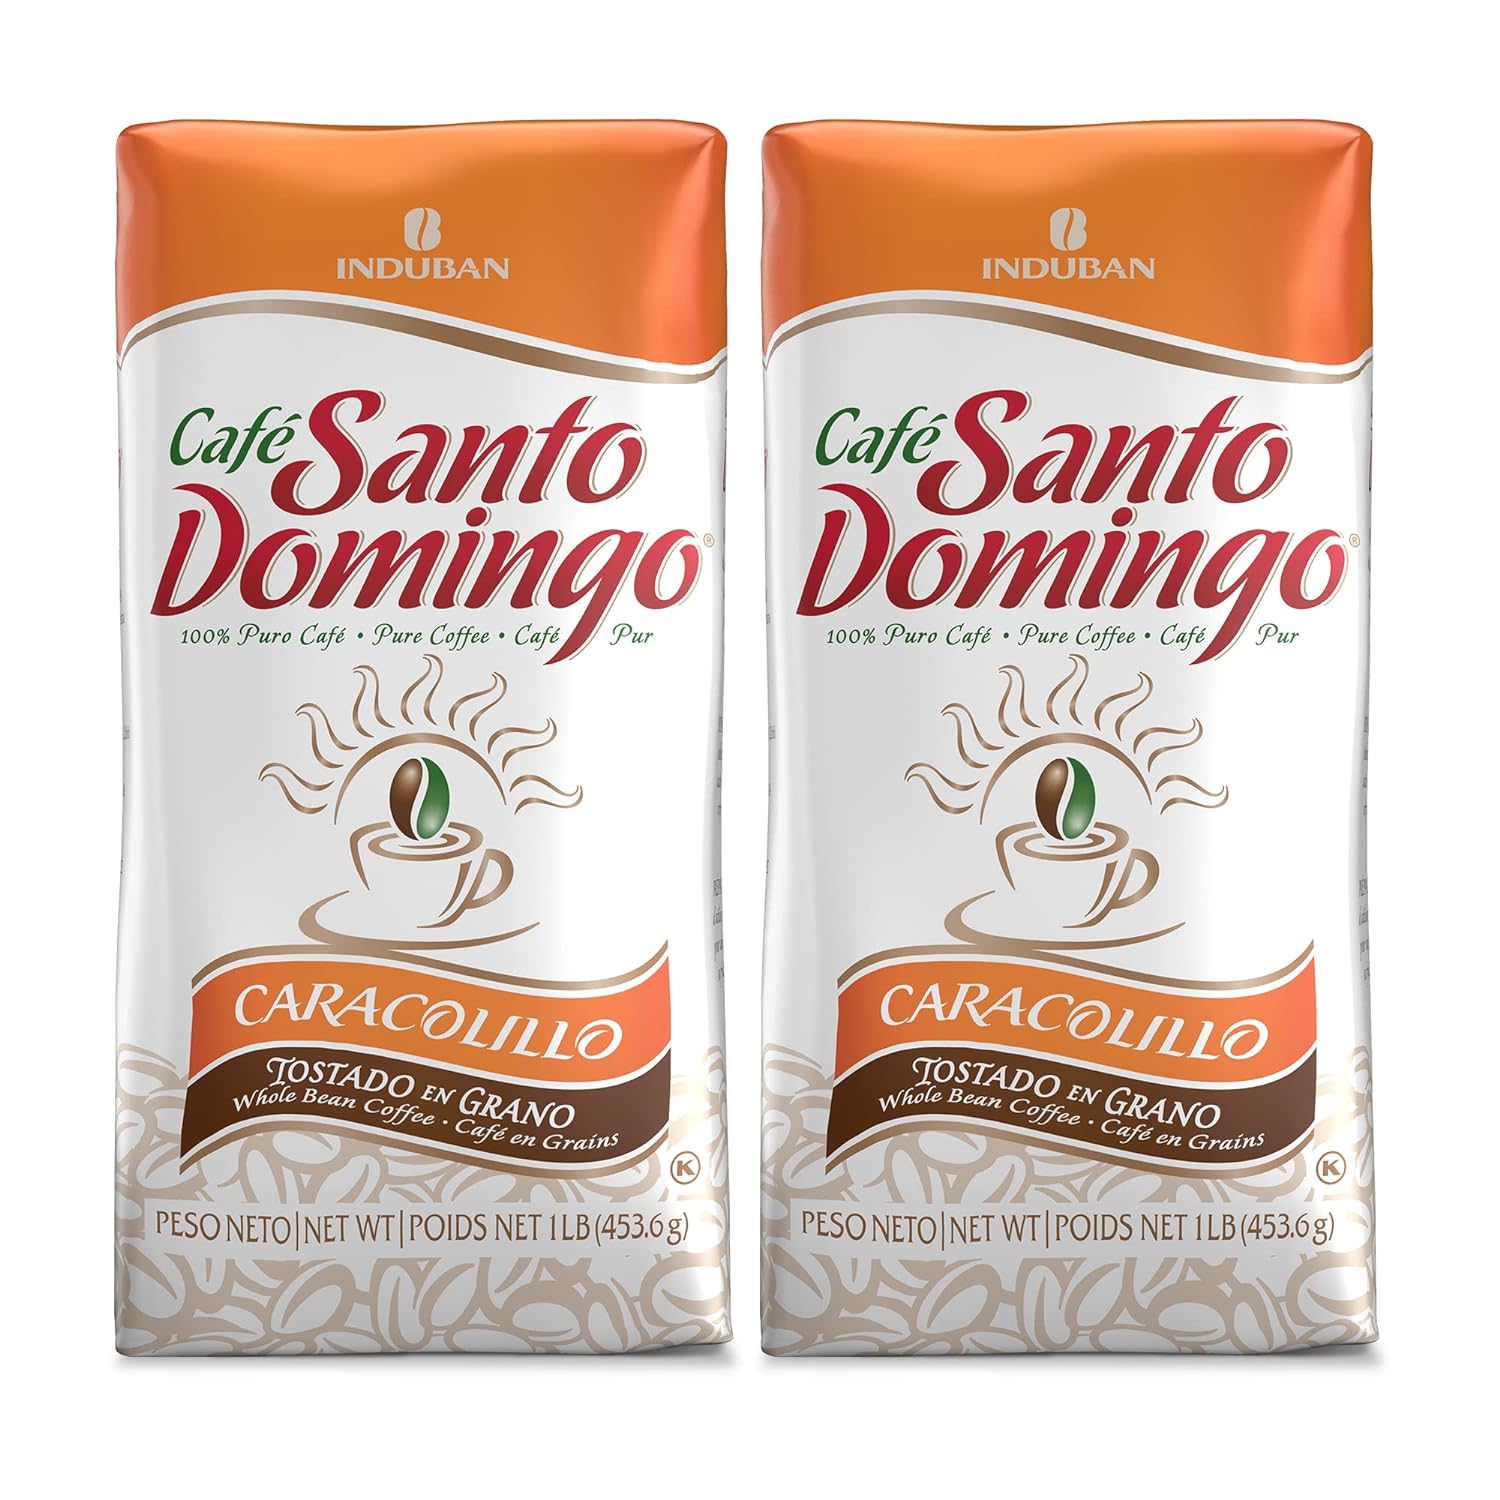 Café Santo Domingo Caracolillo, 16 oz Bag, Whole Bean Peaberry Coffee - Product from the Dominican Republic (Pack of 2)